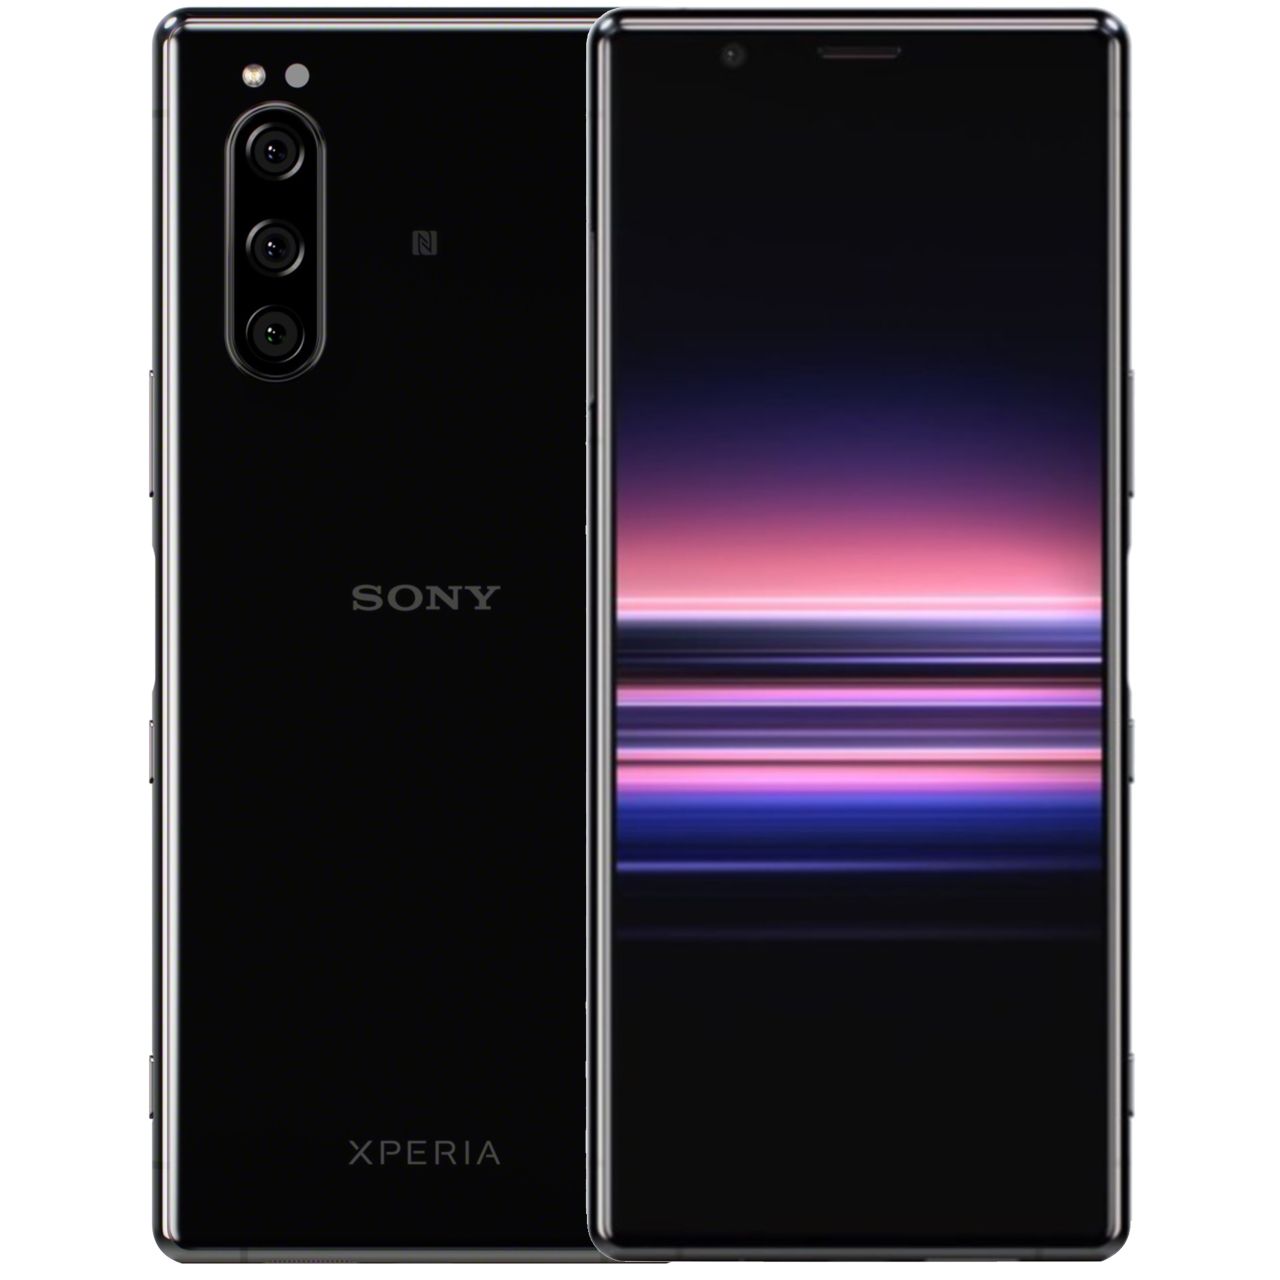 Sony Xperia 5 32GB Smartphone in Black Review